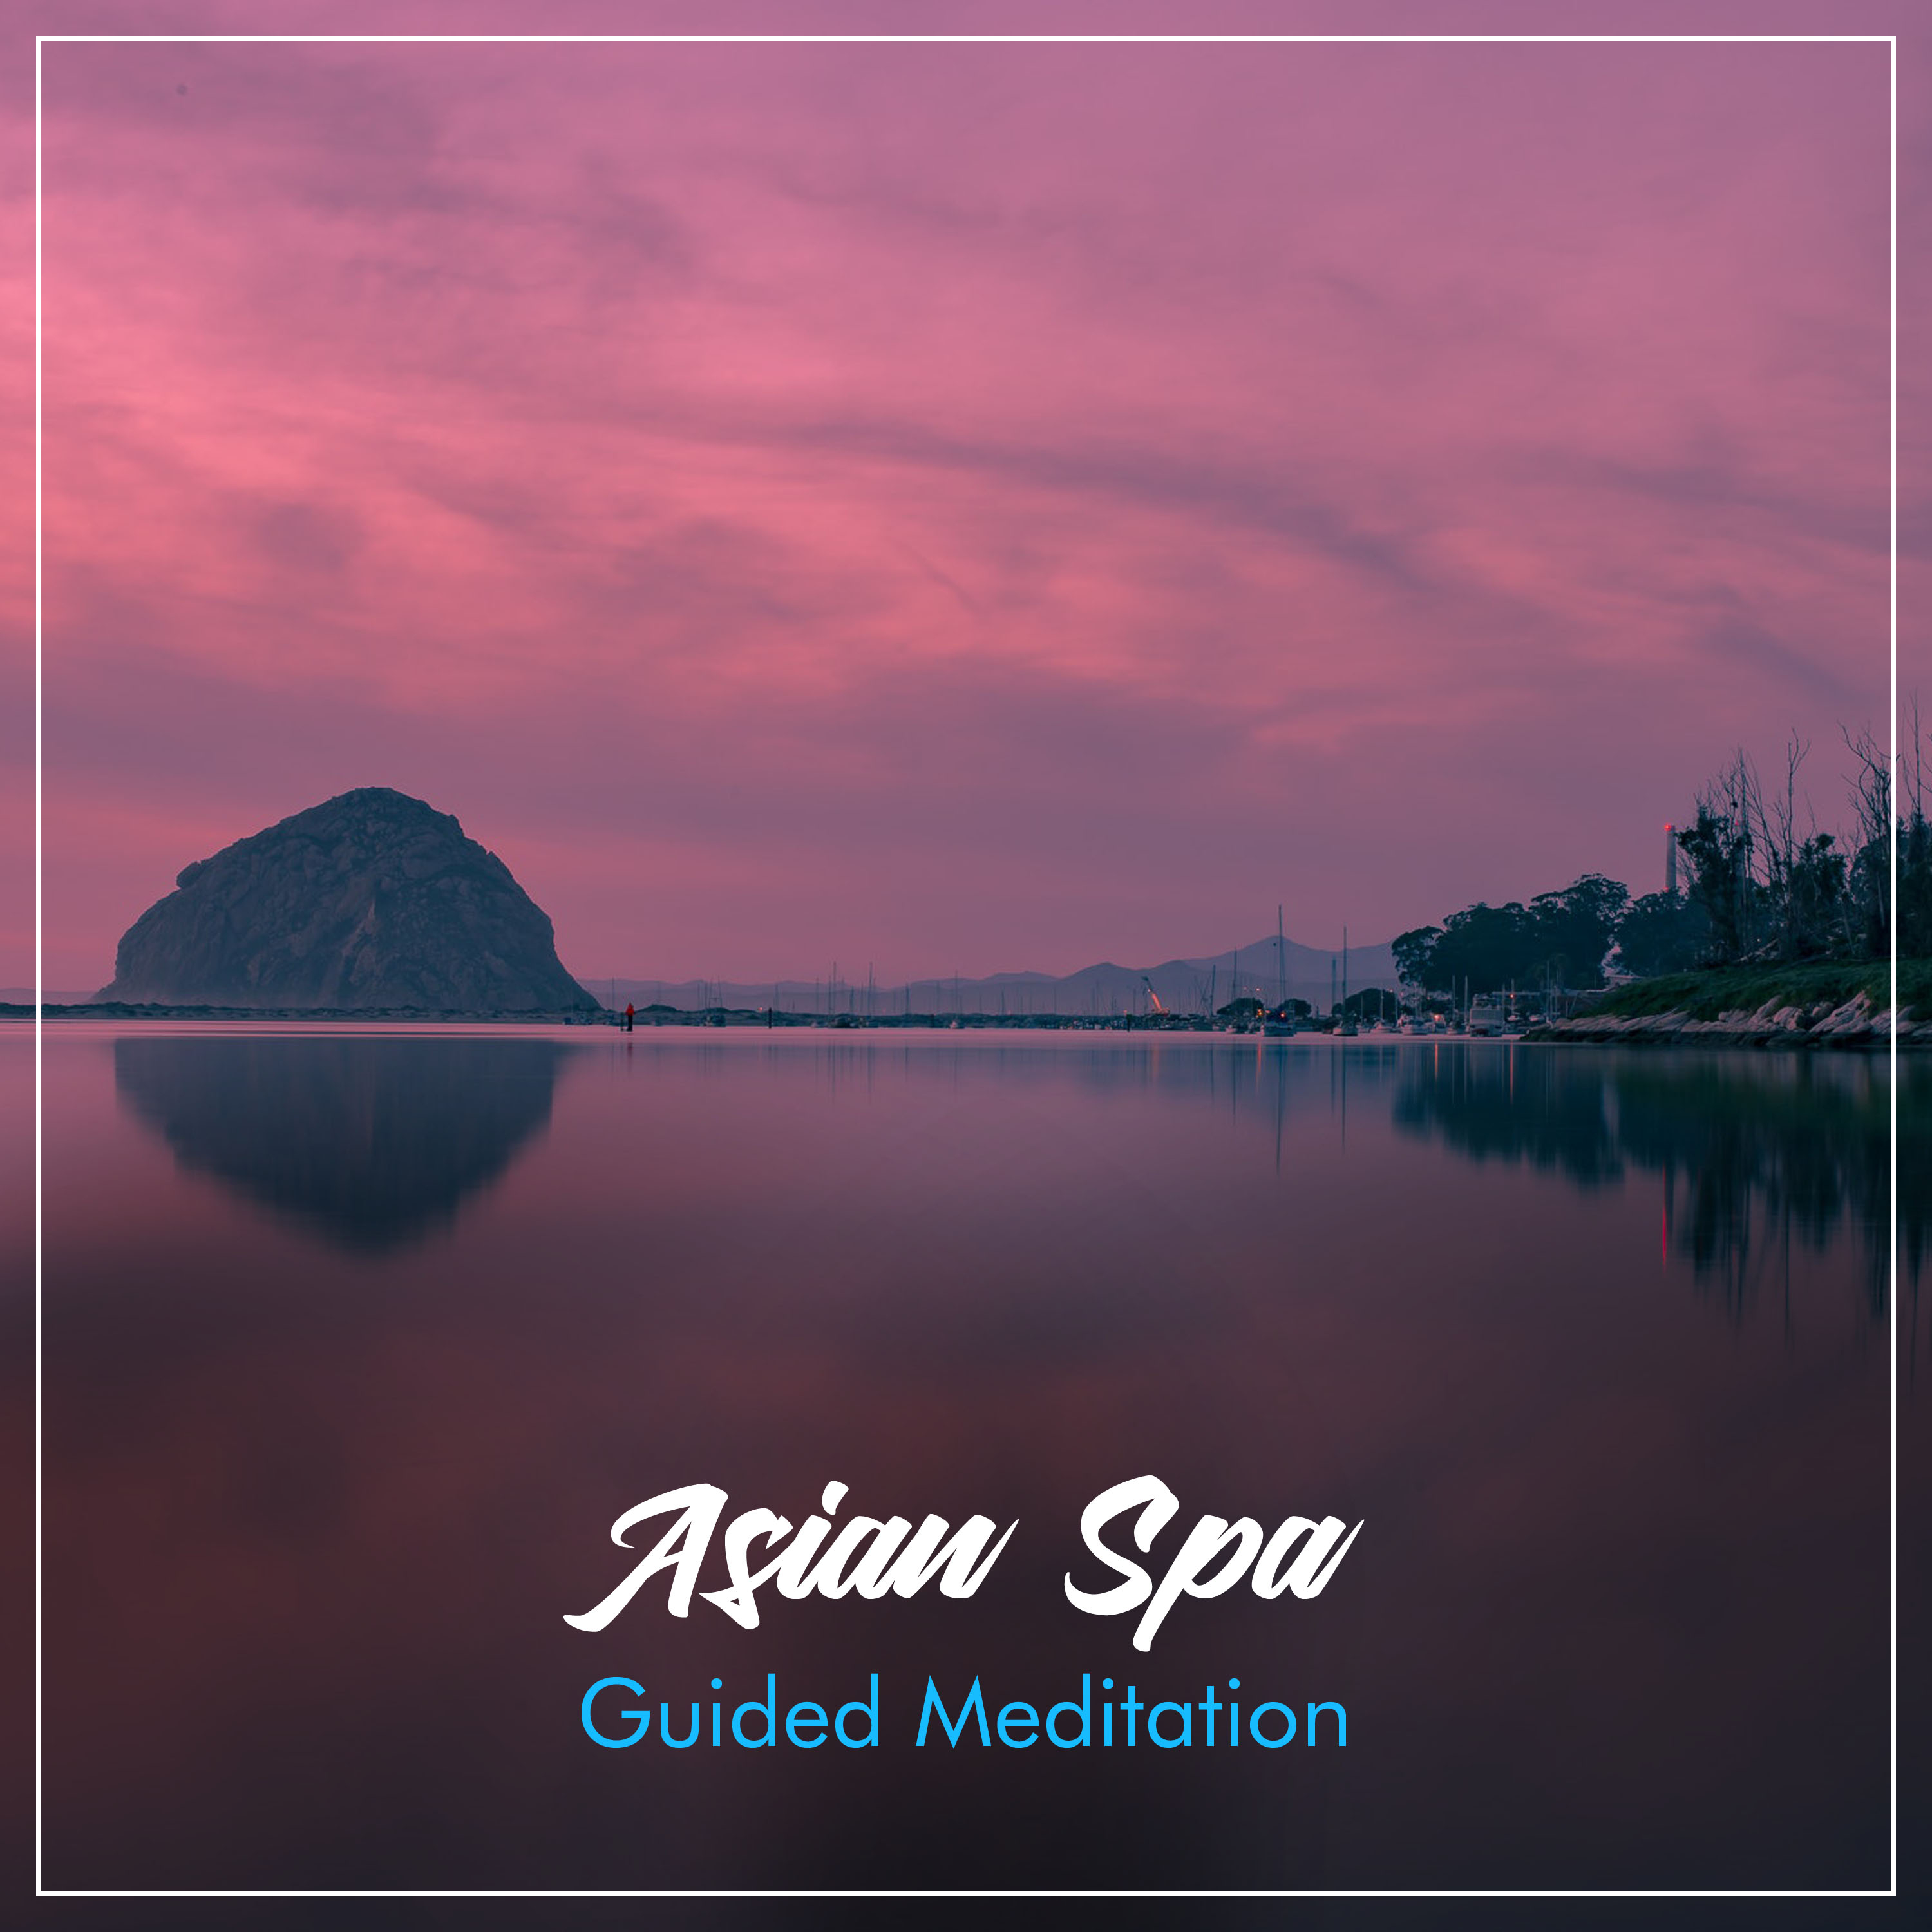 16 Asian Spa: Japanese Relaxation and Guided Meditation